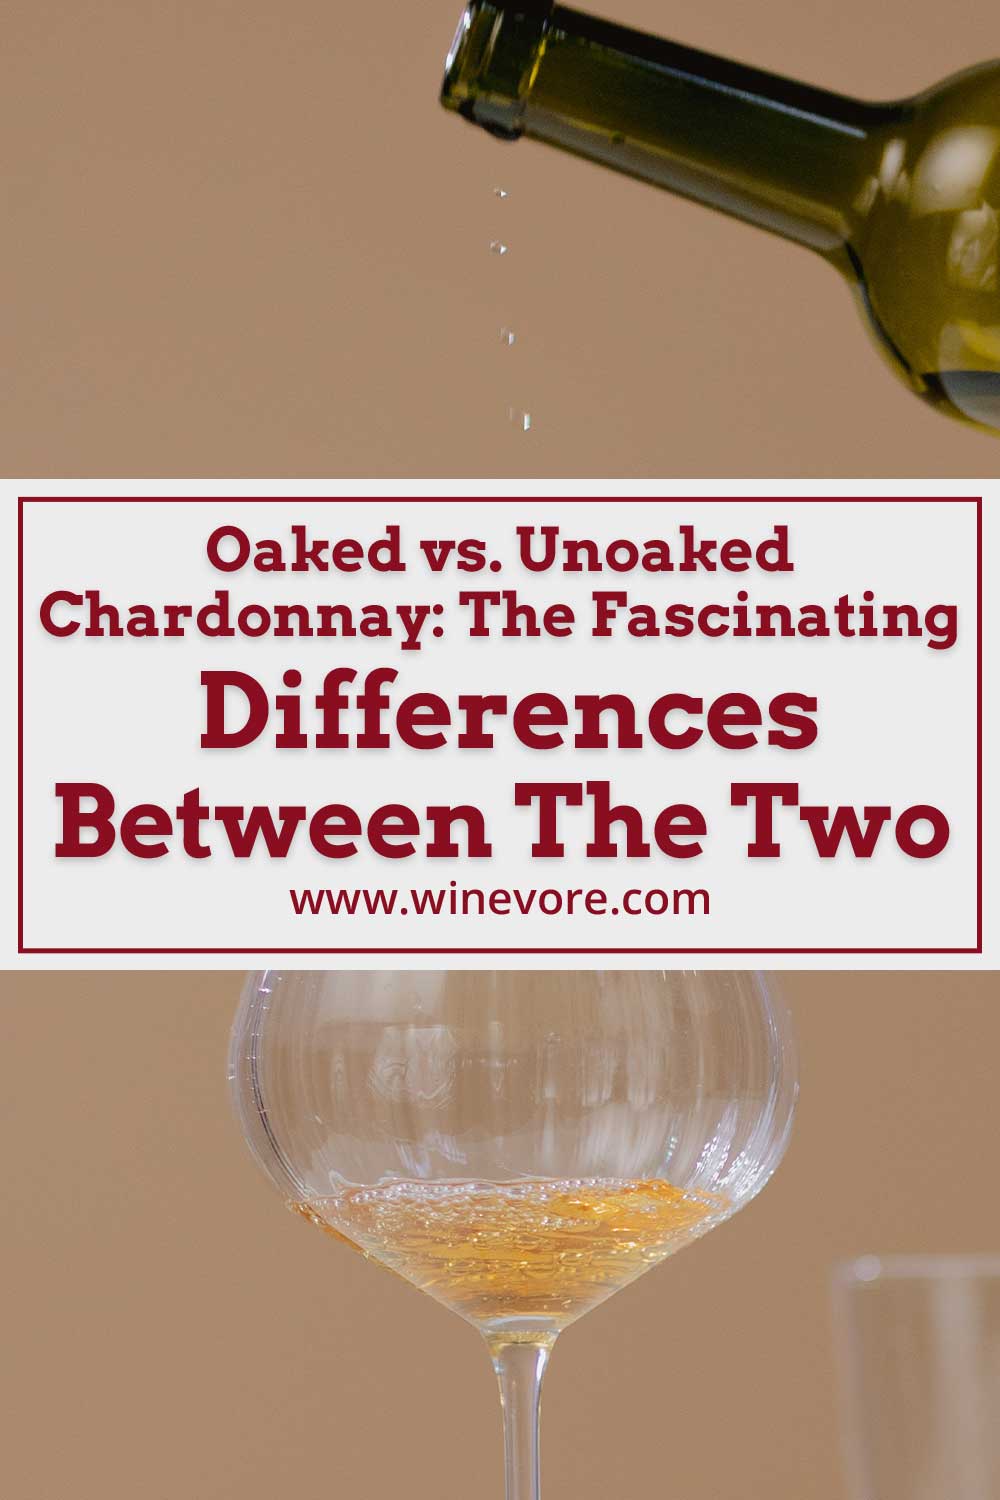 White wine in a glass and a wine bottle dripping wine into it - Oaked vs. Unoaked Chardonnay: The Fascinating Differences Between The Two.